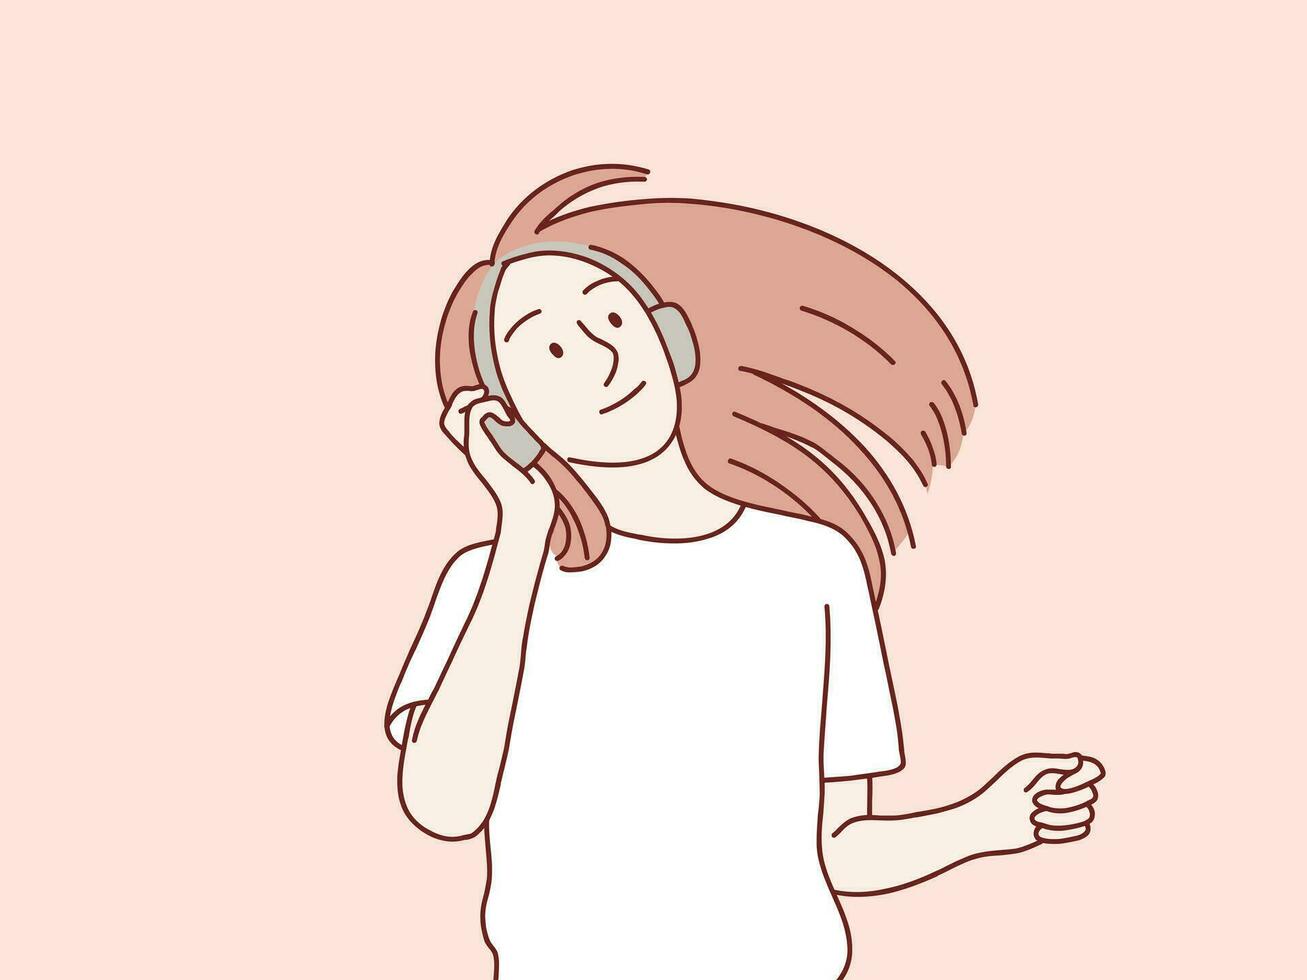 girl wearing headphones listening to music and dancing simple korean style illustration vector